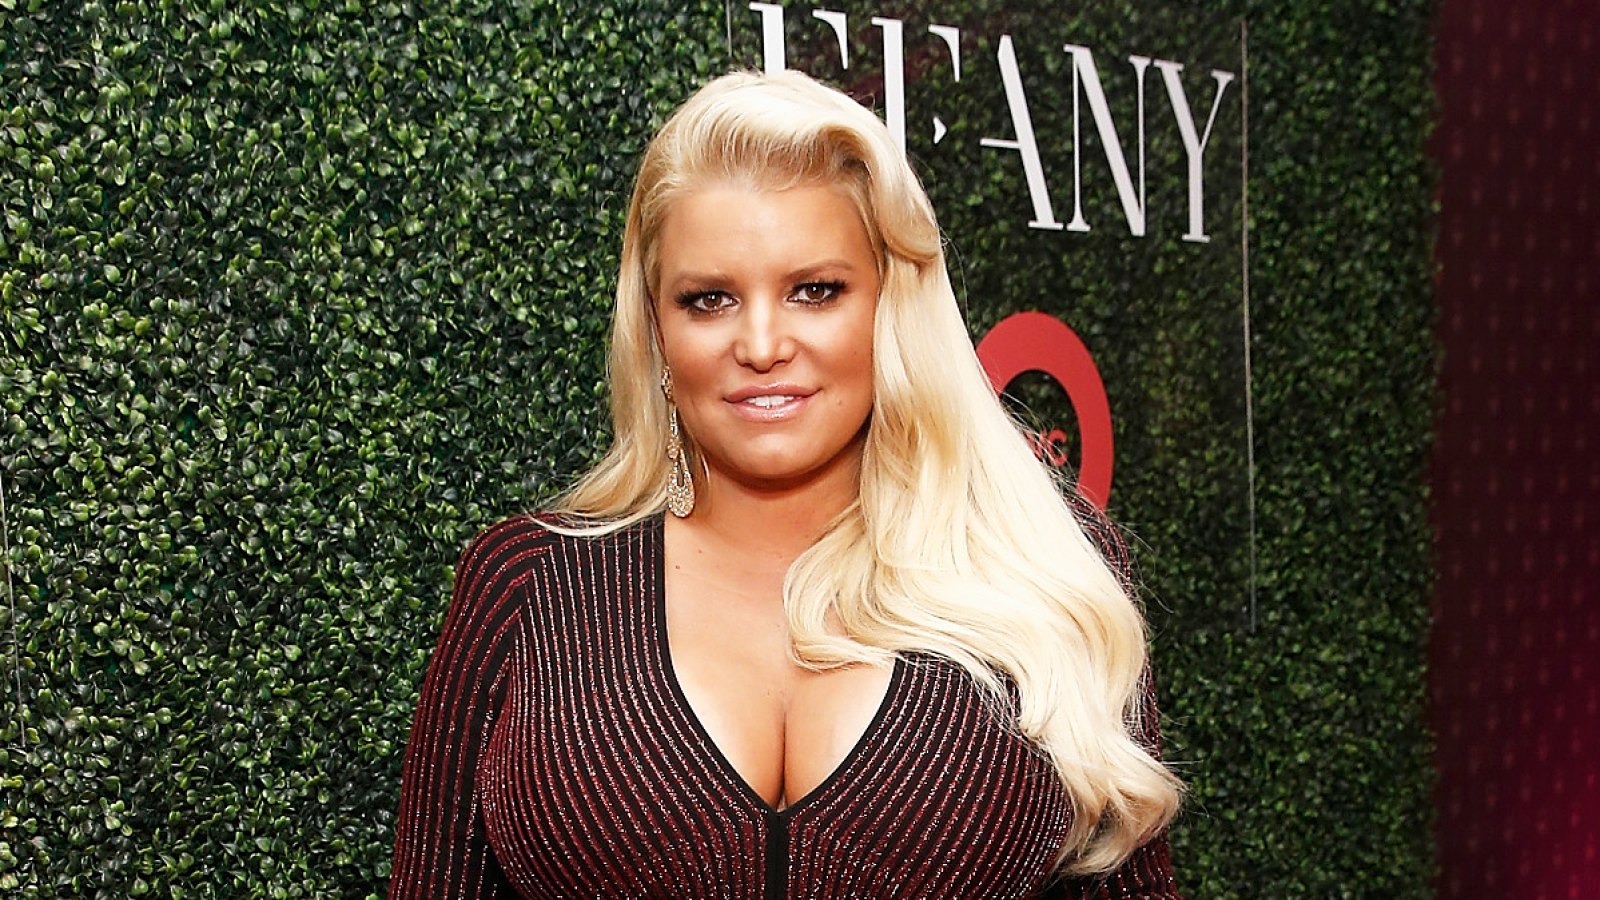 Jessica Simpson Shares First Photo of Newborn Daughter Birdie With Older Siblings